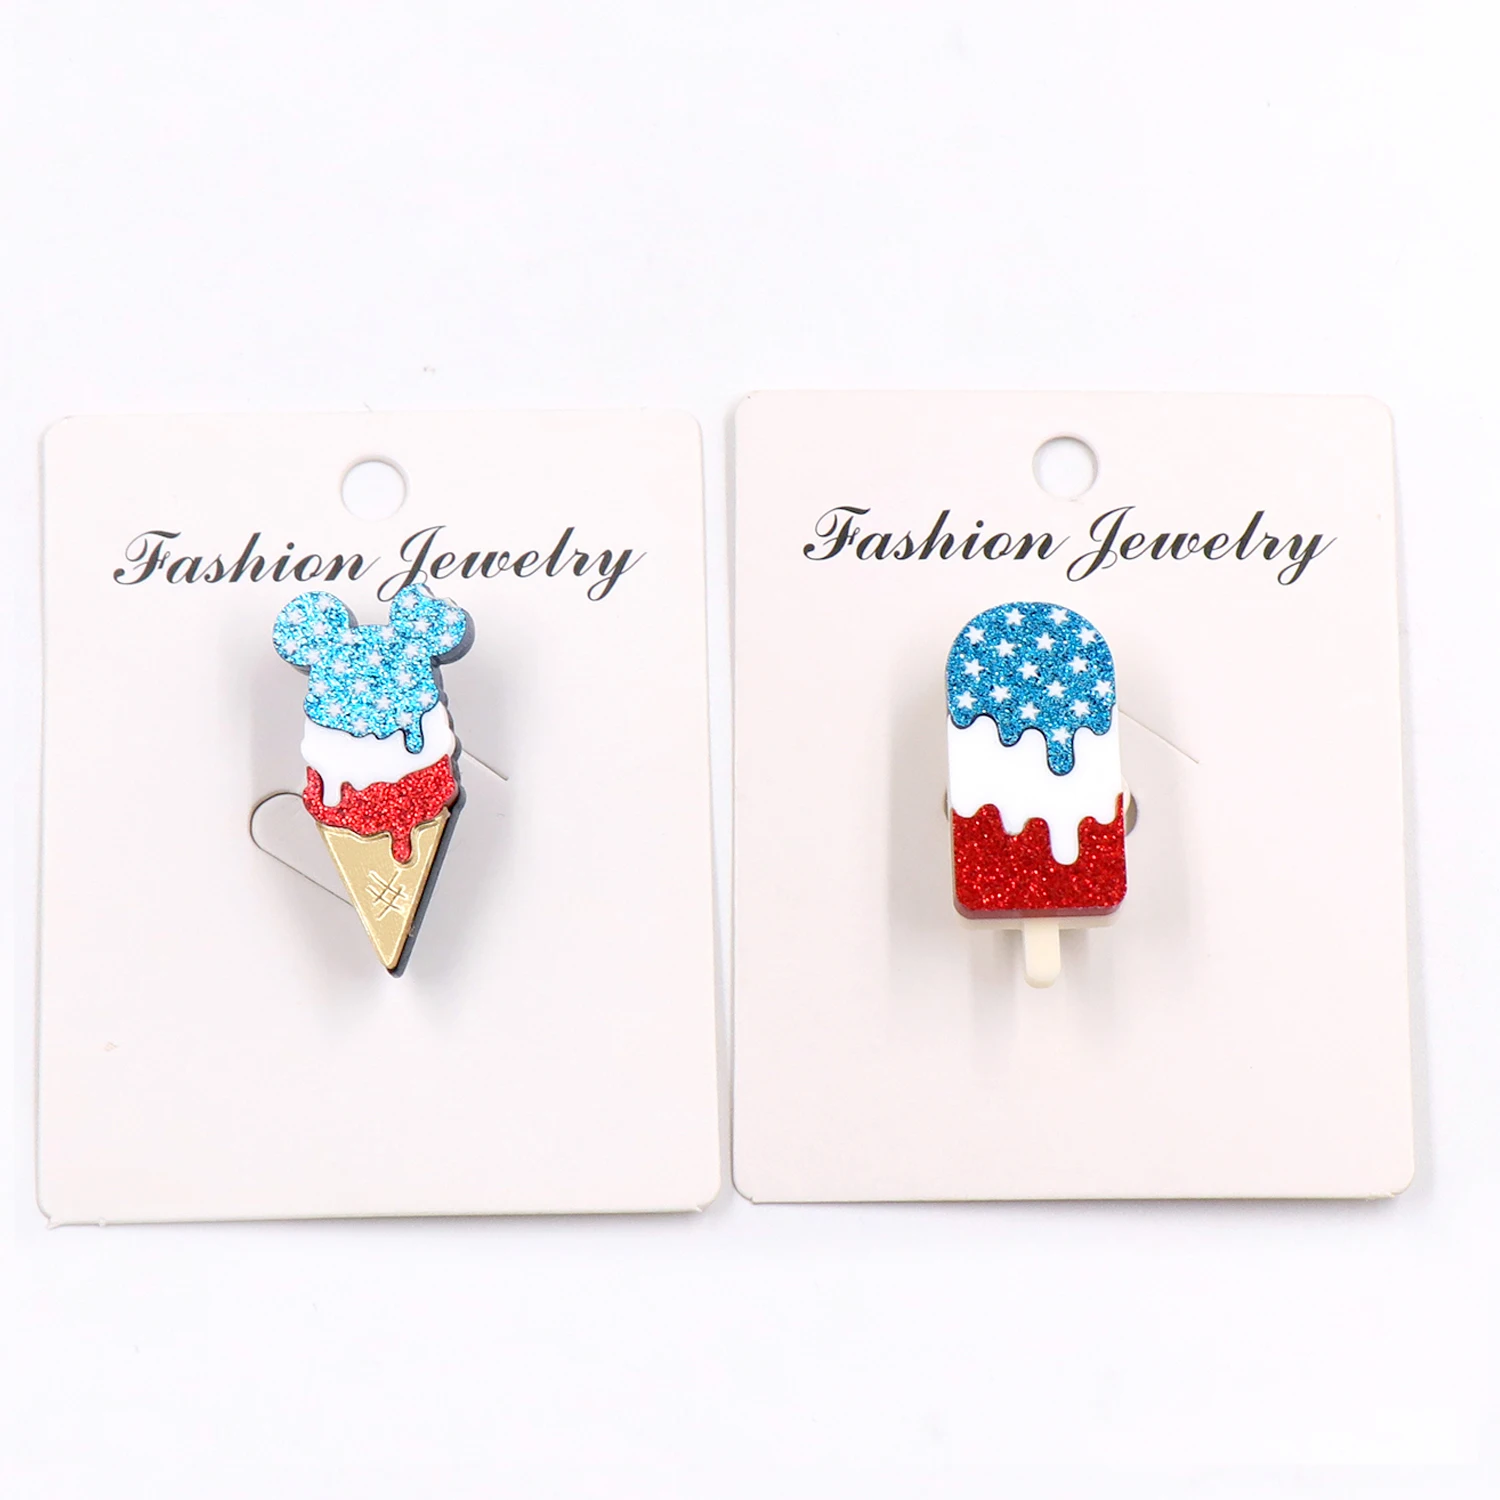 4th of July Independence Day Popsicle Mouse Head Brooch (Safty Pin) Laser Cut Acrylic Jewelry Fruit For Baby Girl